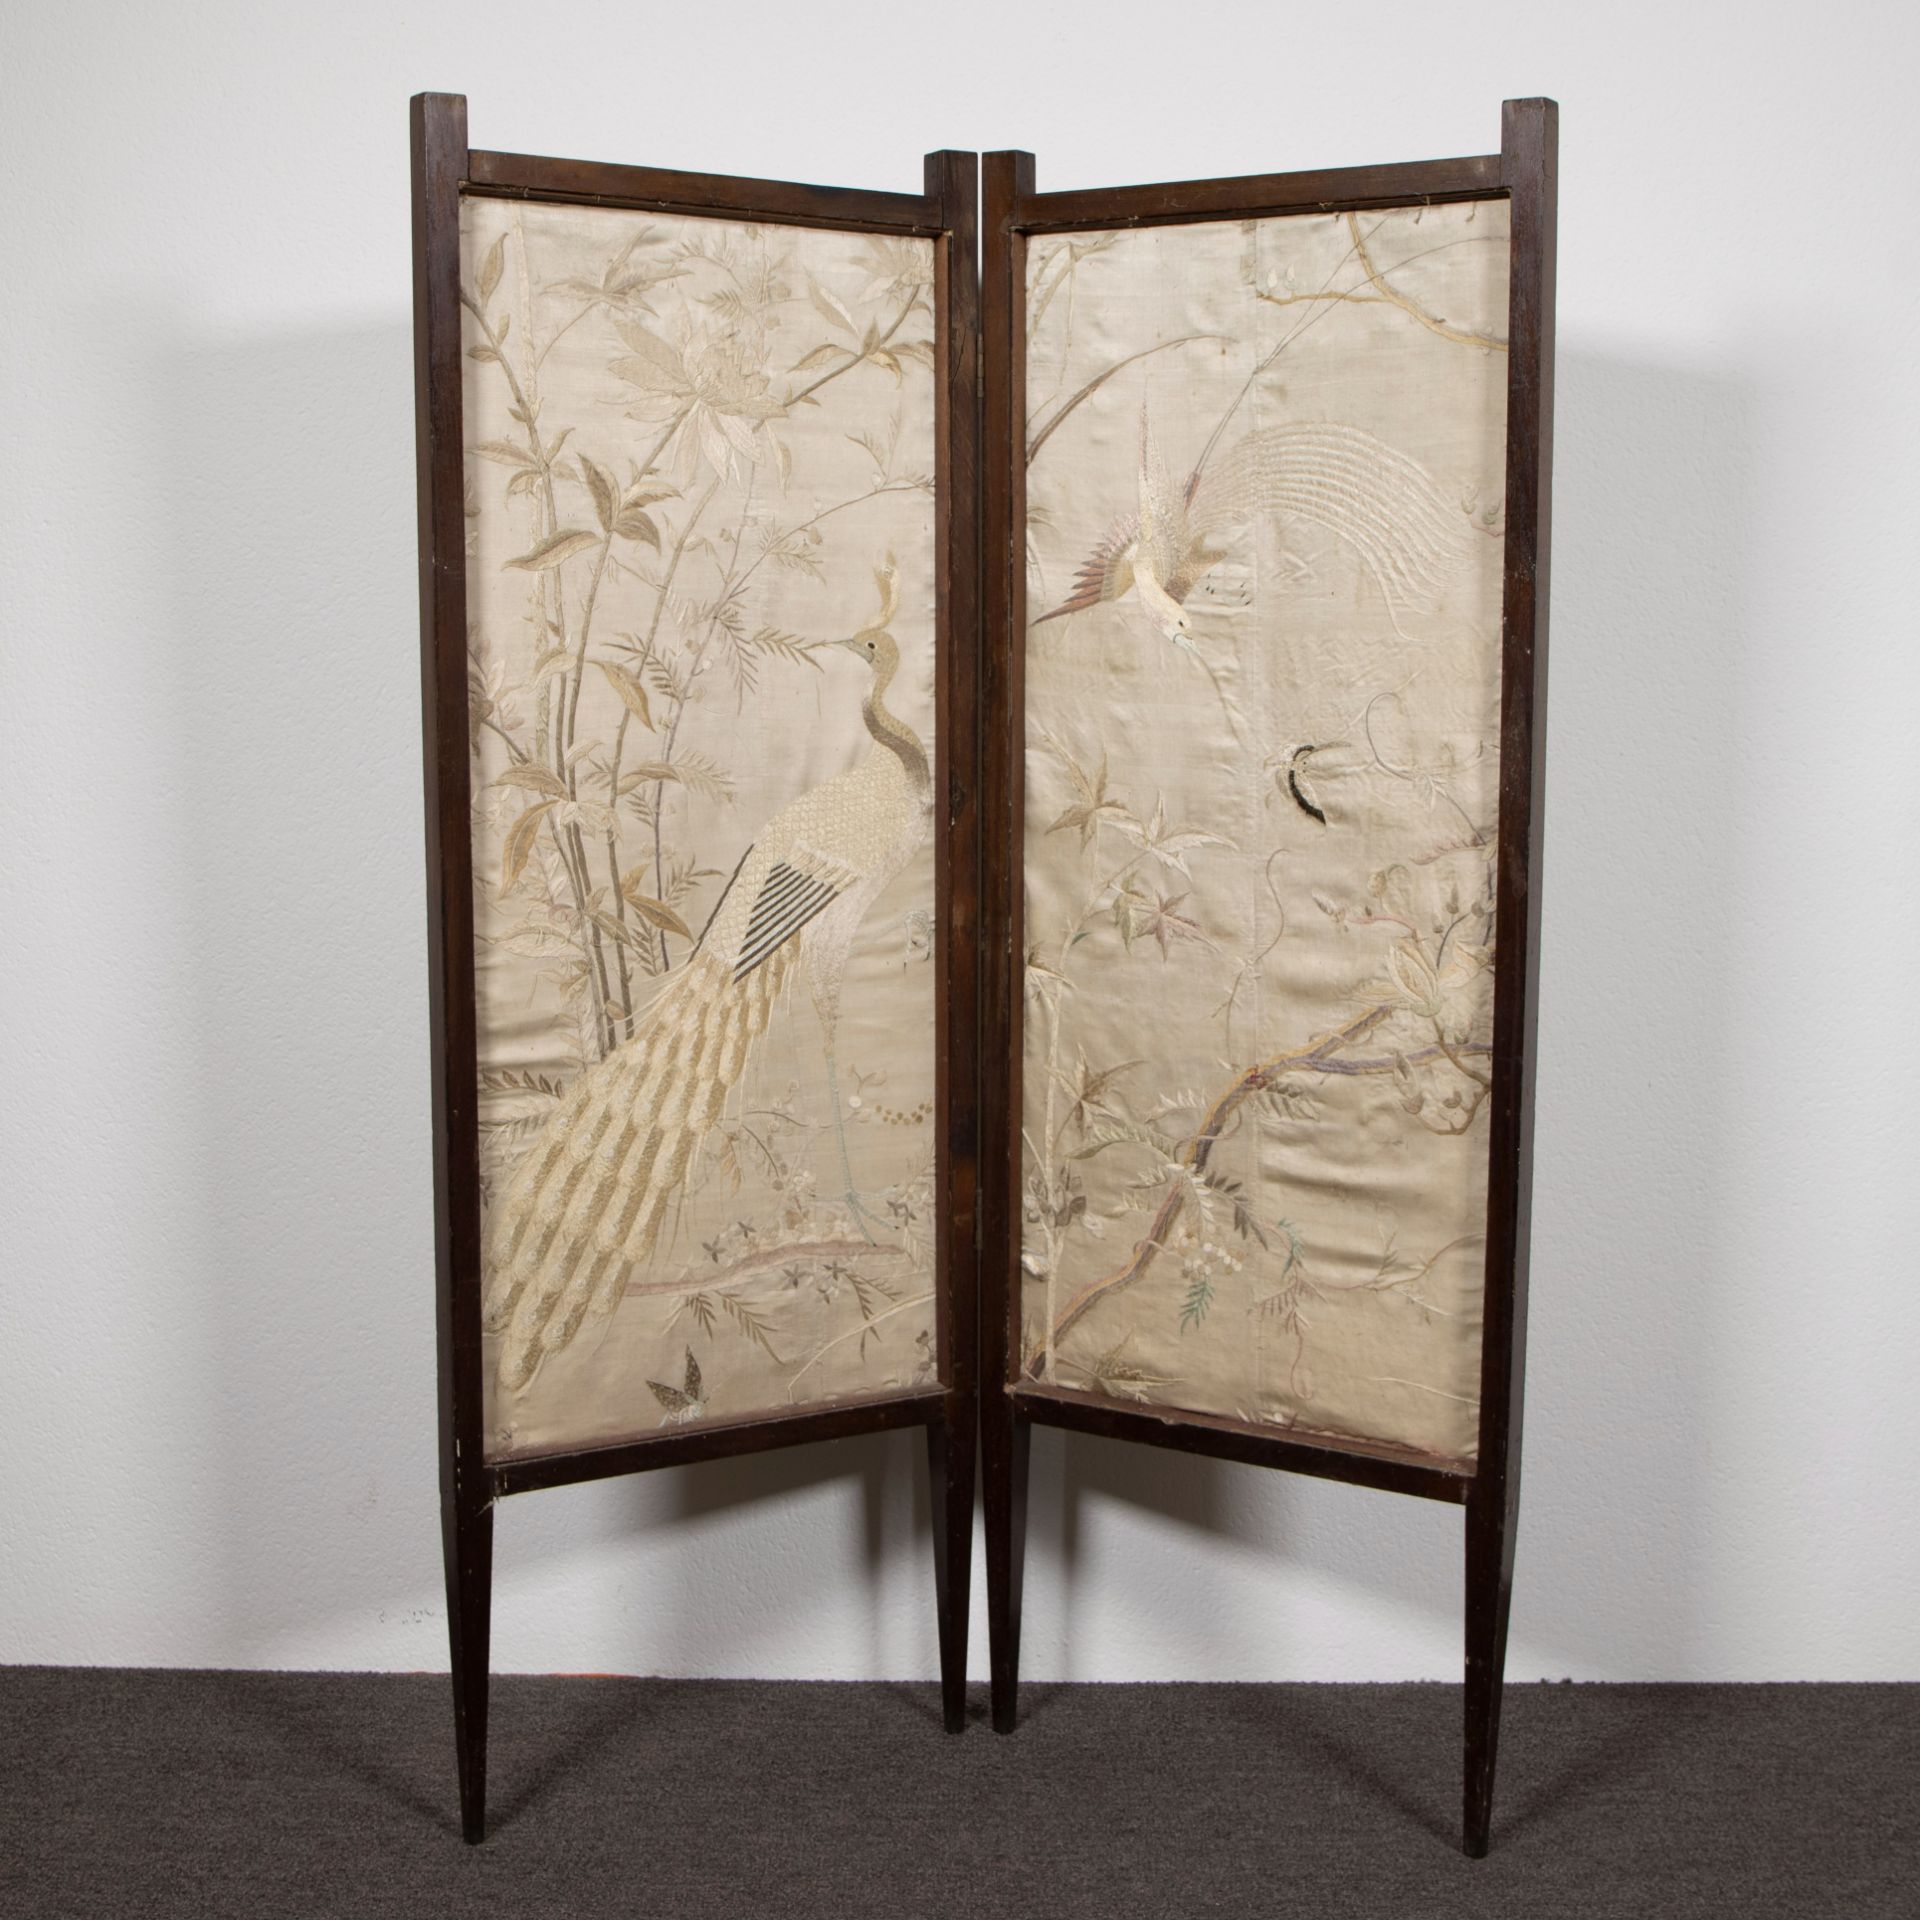 Chinese silk folding screen with floral and peacock decor 18th century in French wooden frame